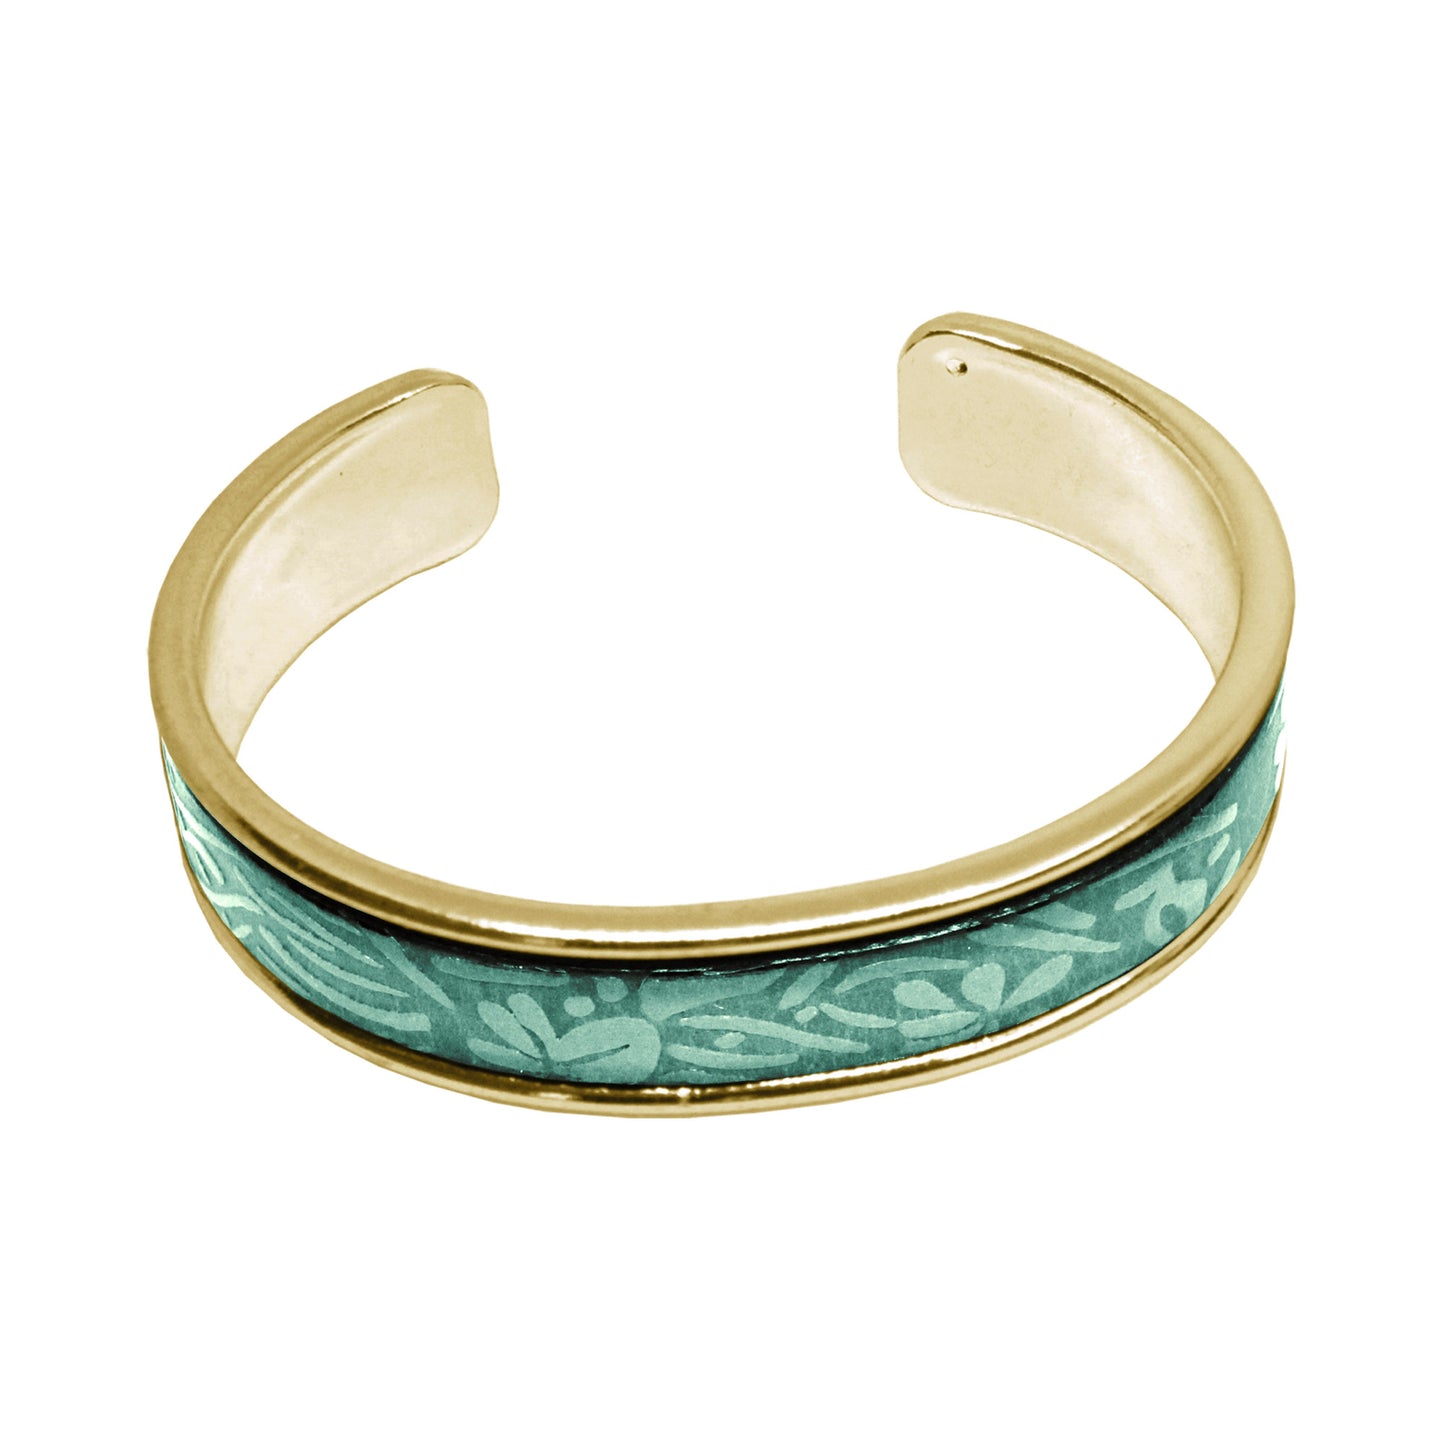 Turquoise Leather Cuff Bracelet / fits up to 7 inch wrist size / embossed floral leather / gold plated cuff